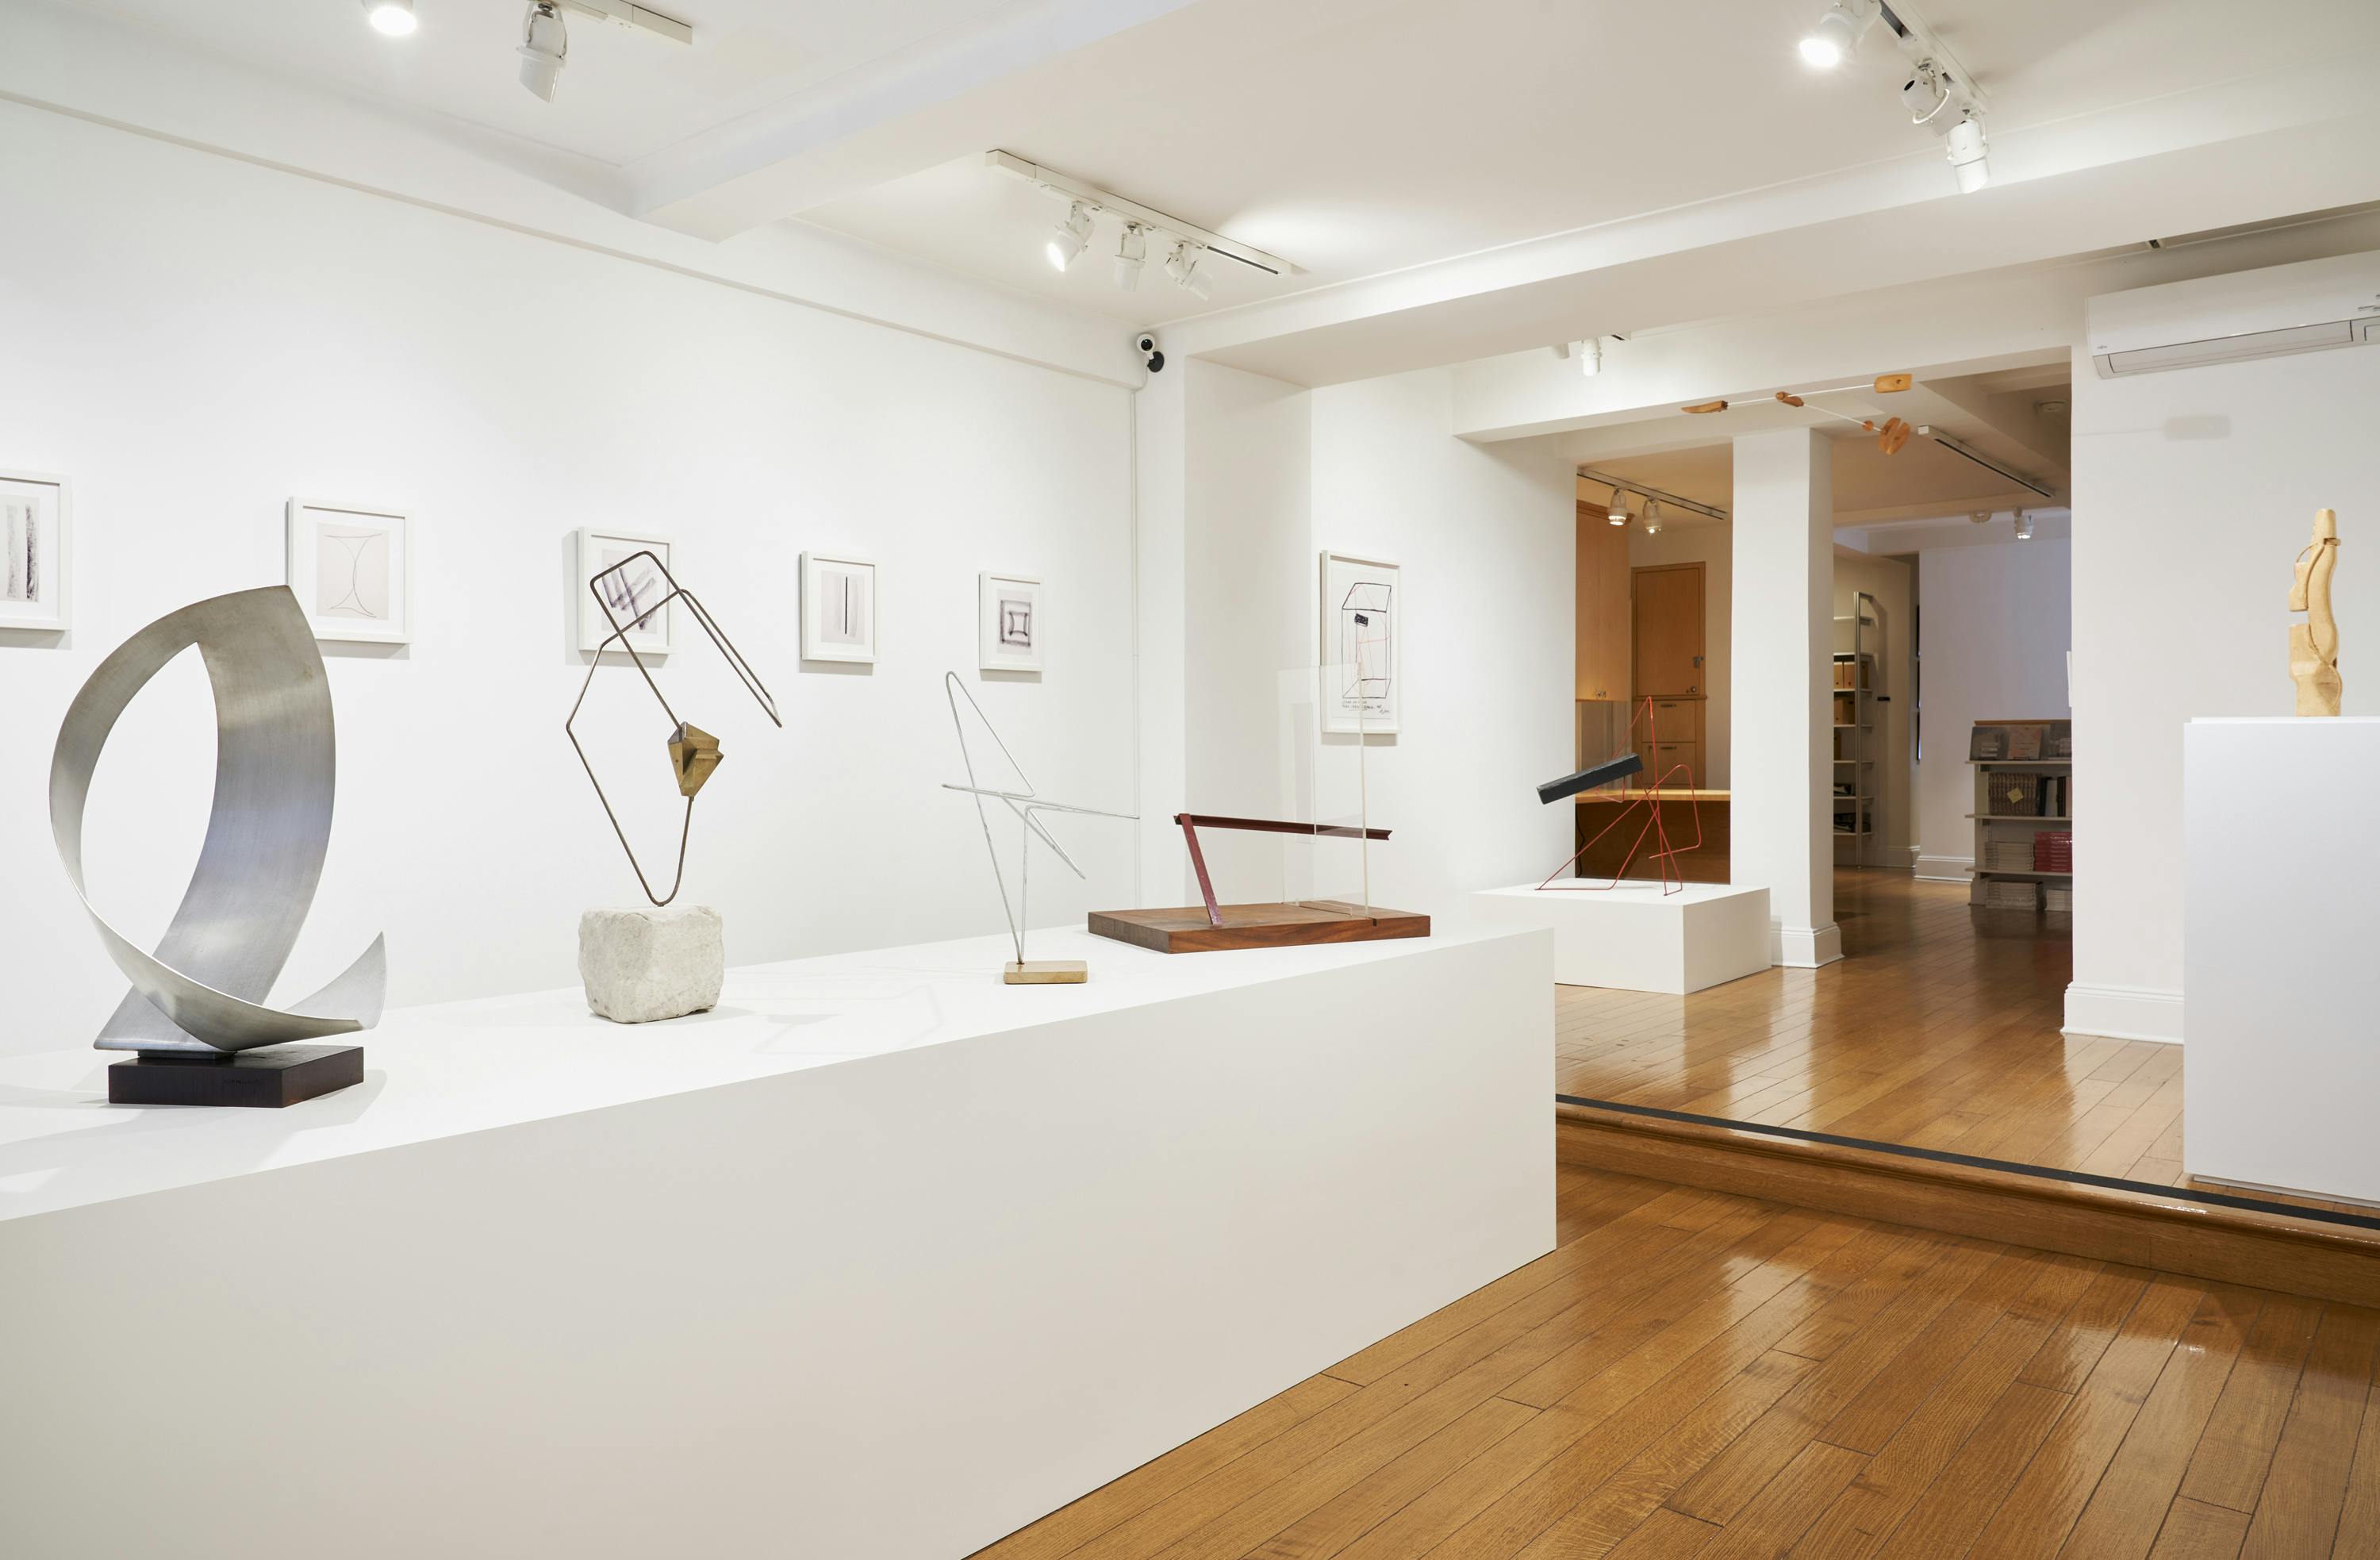 Gallery view of From Surface to Space exhibition depicting one hanging sculpture, five free-standing sculptures, and six wall-mounted drawings.